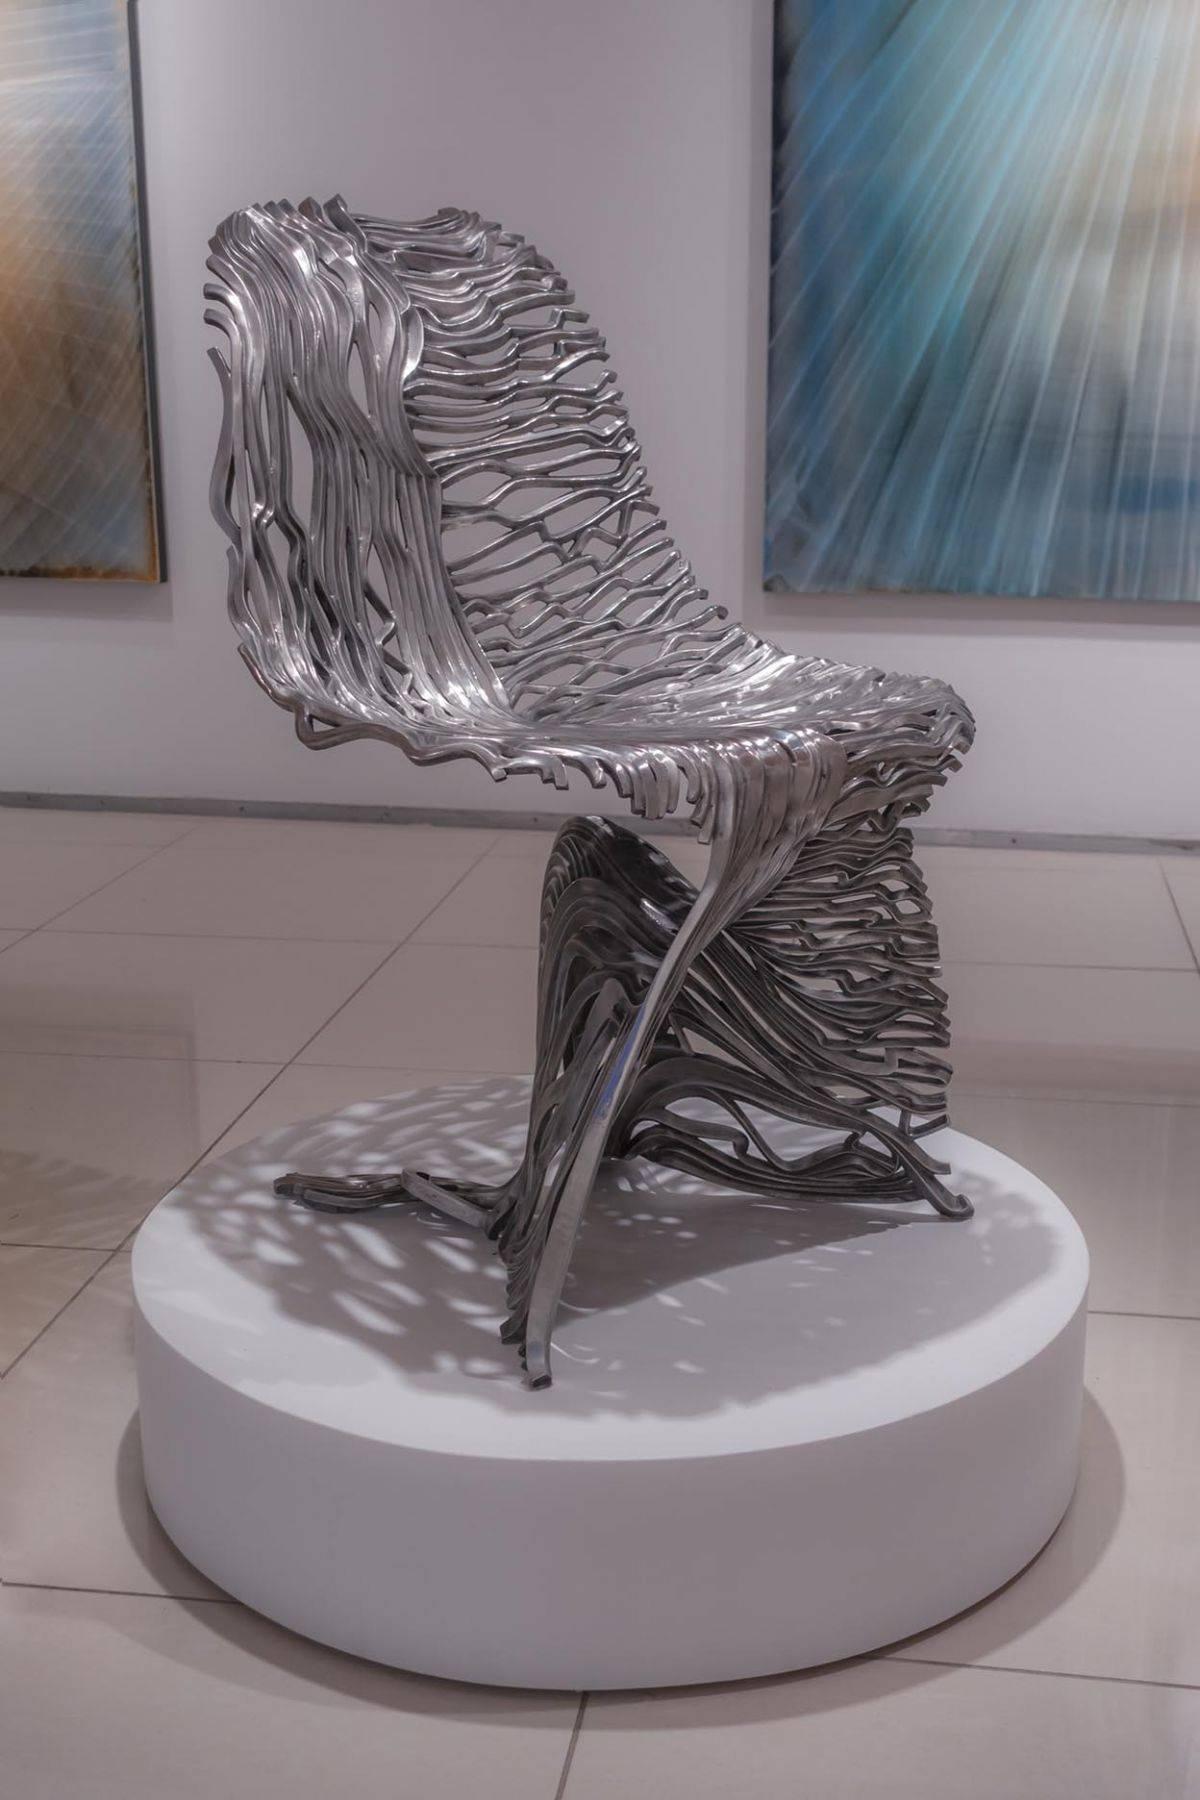 Dichotomy Chair - Sculpture by Gil Bruvel